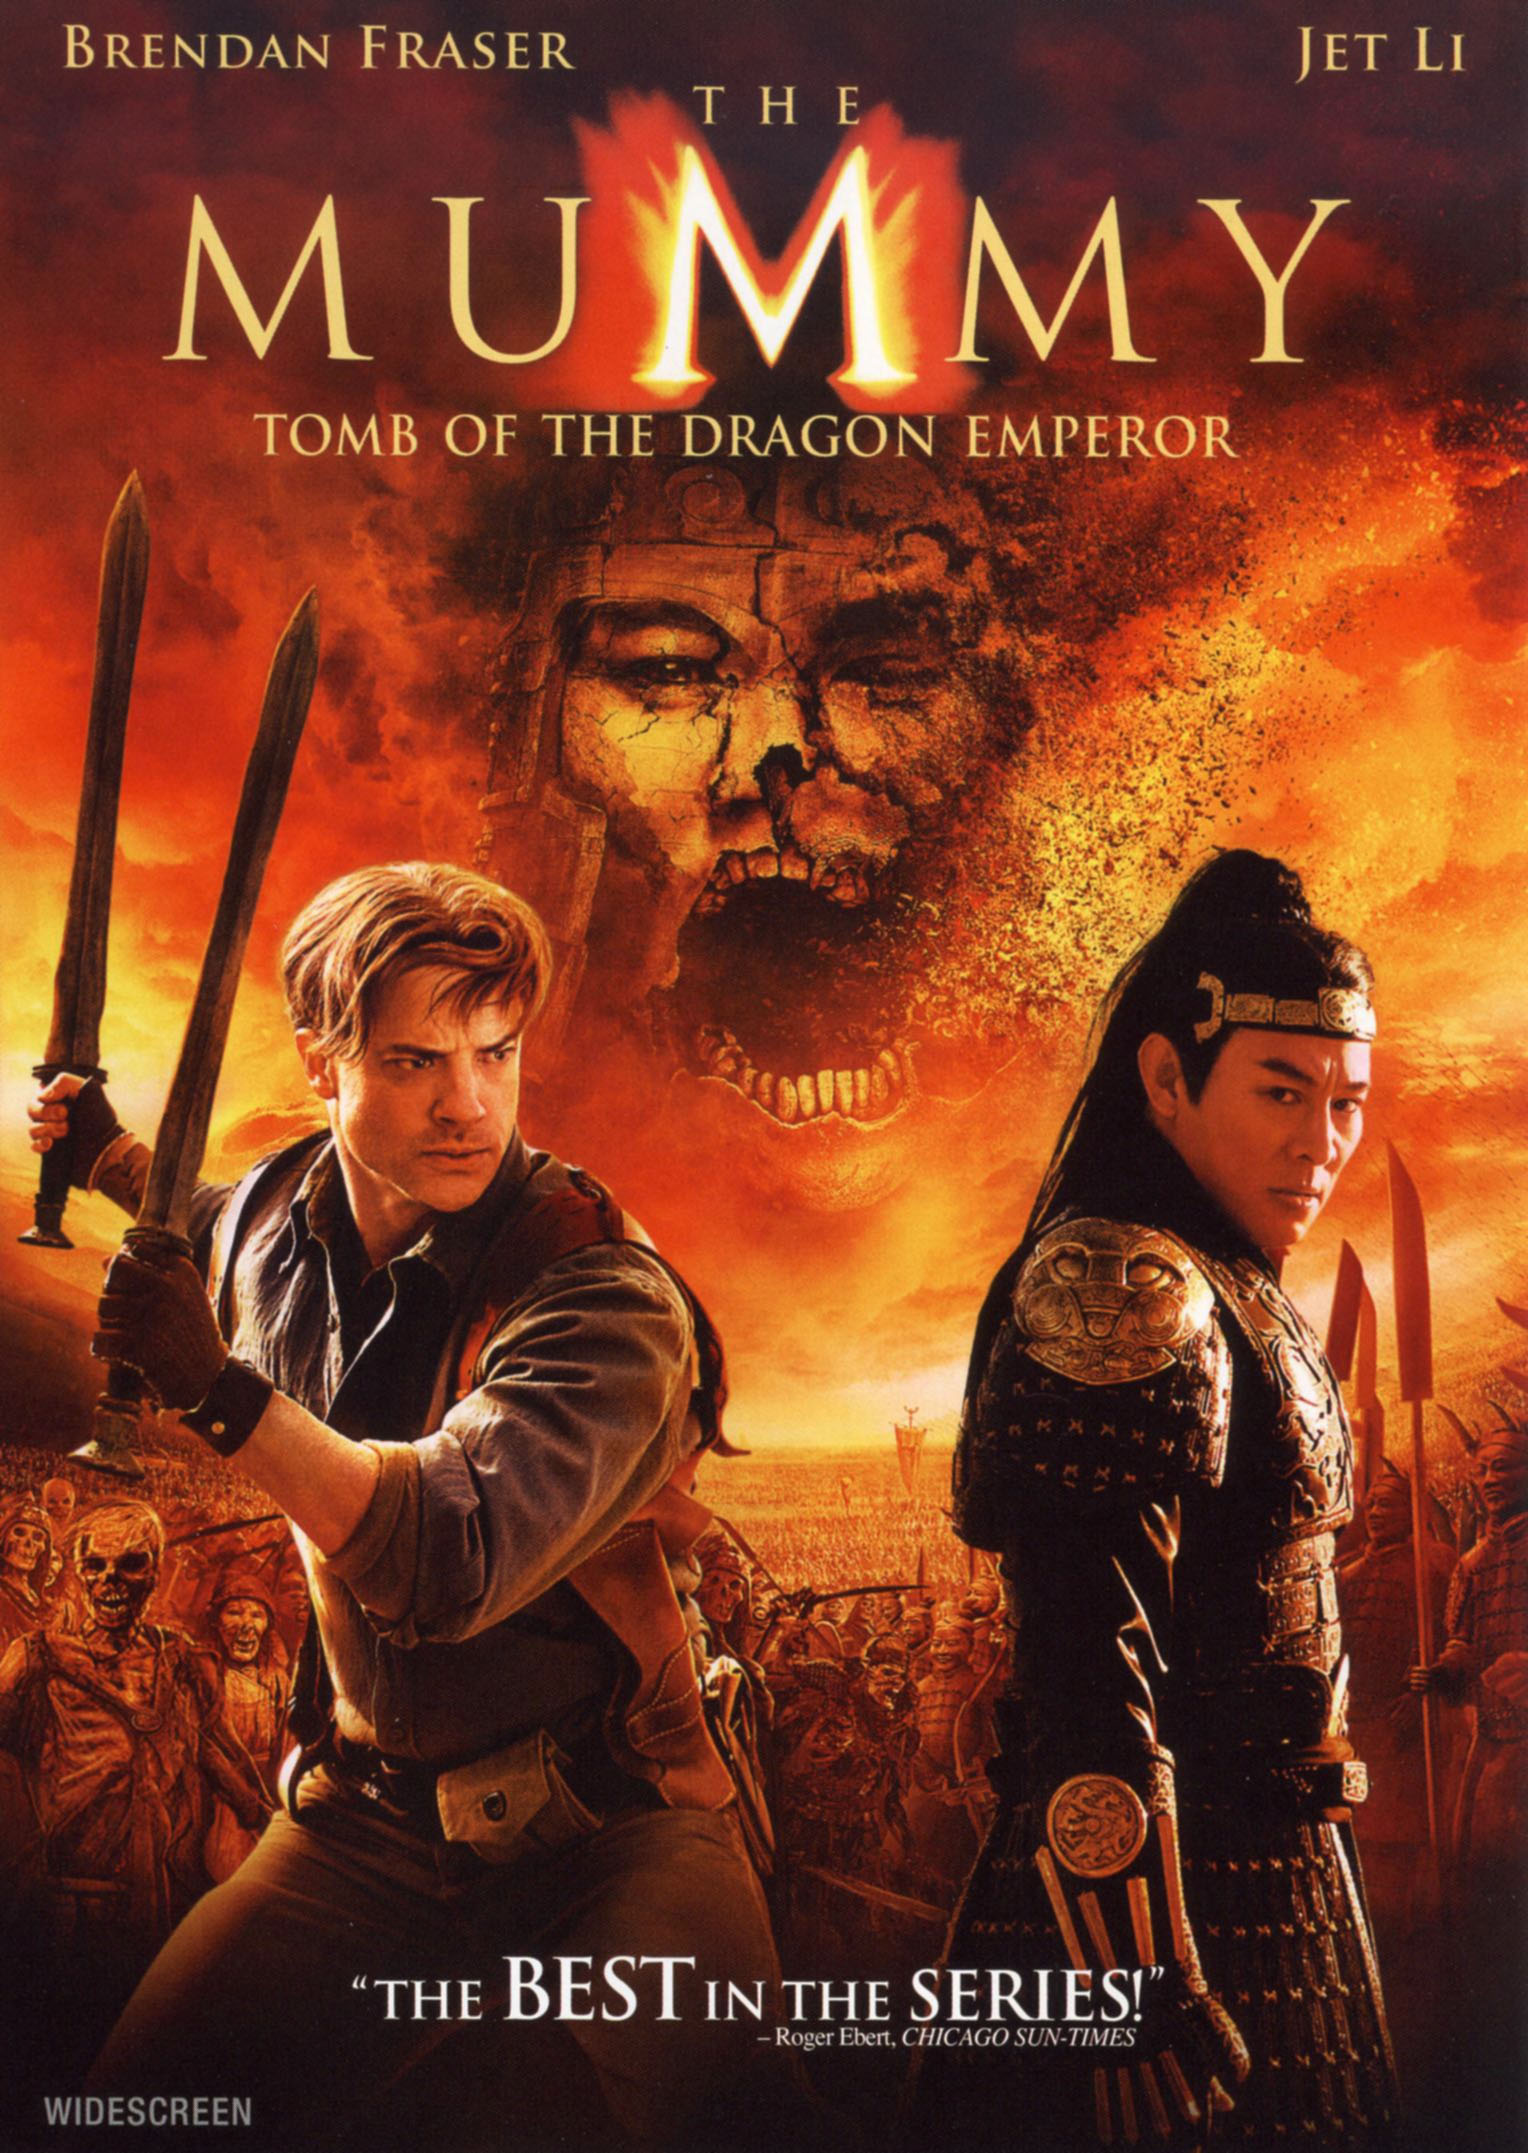 The Mummy Tomb Of The Dragon Emperor 2008 Full Movie Online In Hd Quality